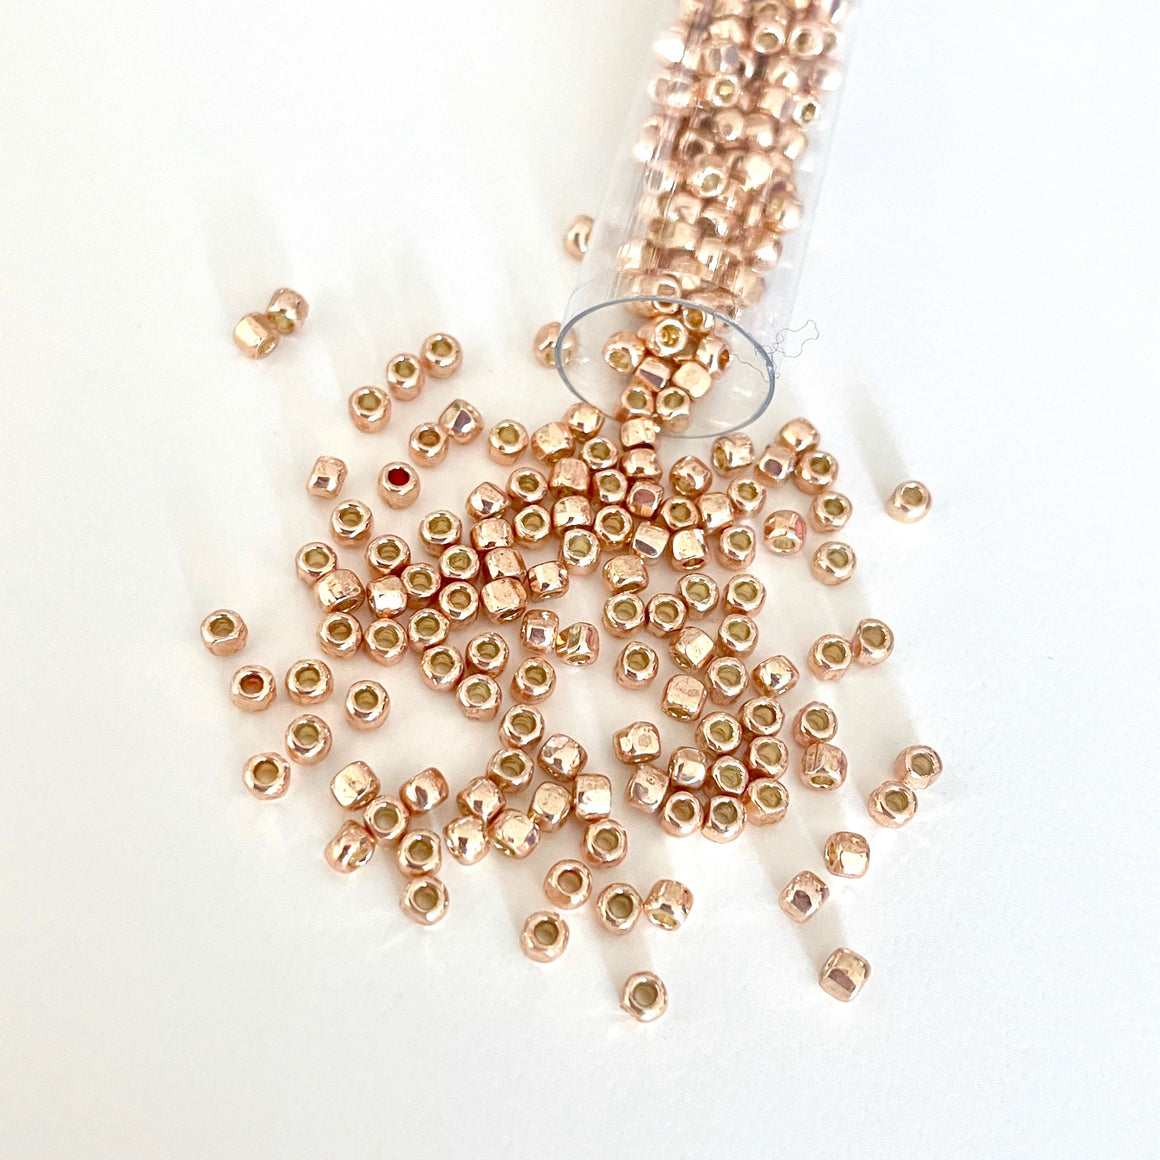 Like the warmth of the sun mixed with the creamy color of a rose this 3-cut size 8º rose gold seed bead shimmers in the light due to its 3 facets. A perfect bead to add to all of the metallic colors for a bit of flash. This bead has a permanent finish so the color will not rub off/Island Cove Beads & Gallery